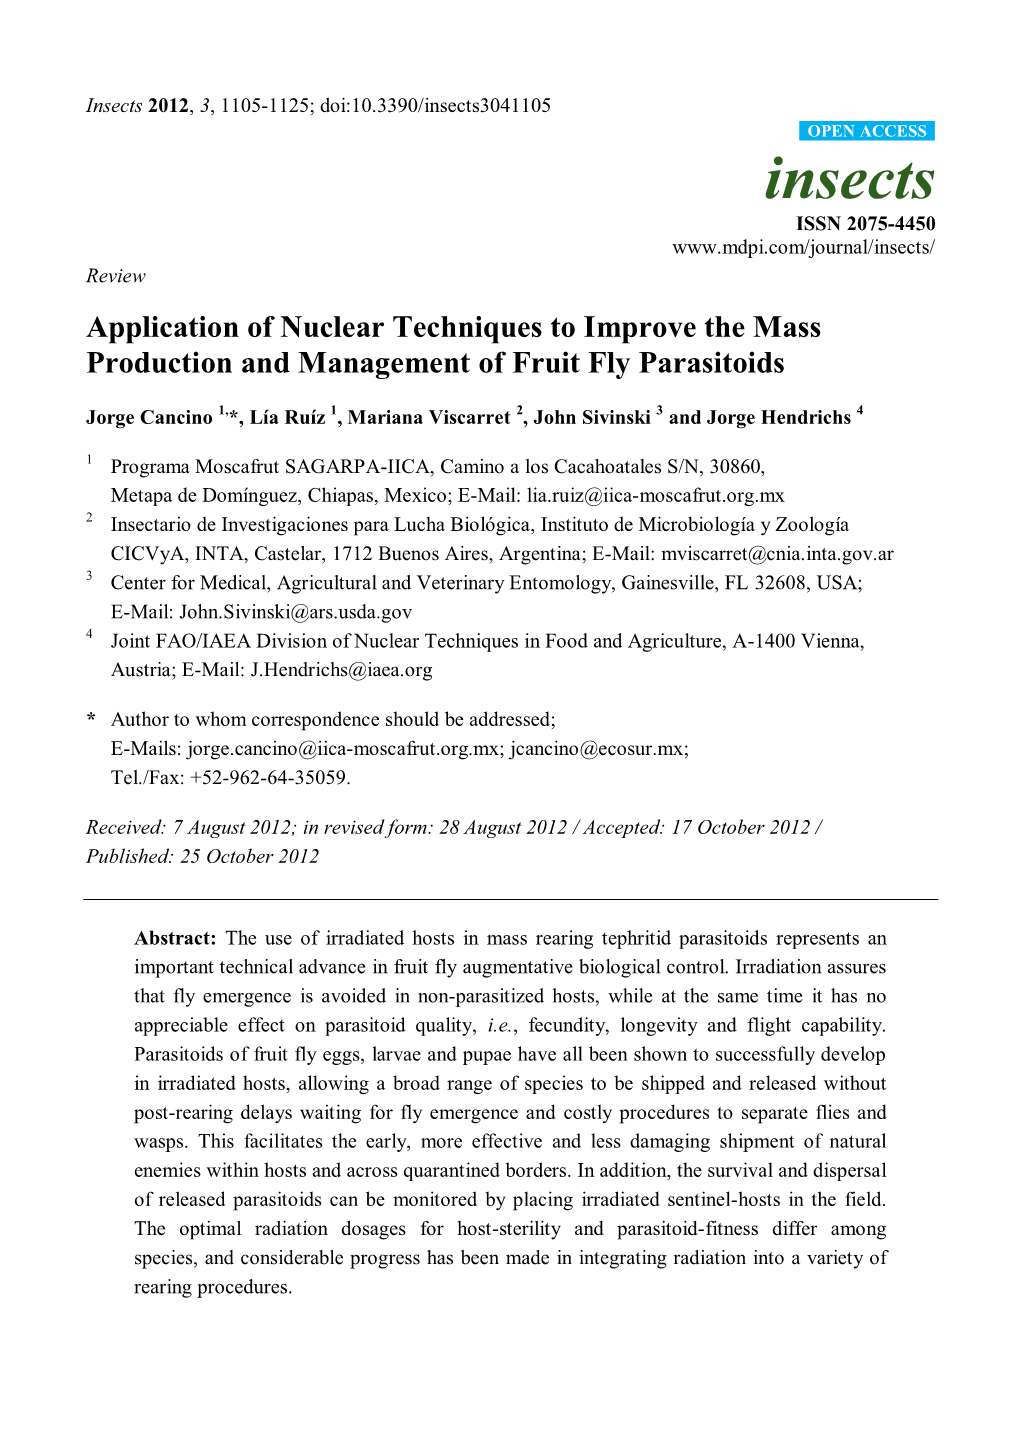 Application of Nuclear Techniques to Improve the Mass Production and Management of Fruit Fly Parasitoids